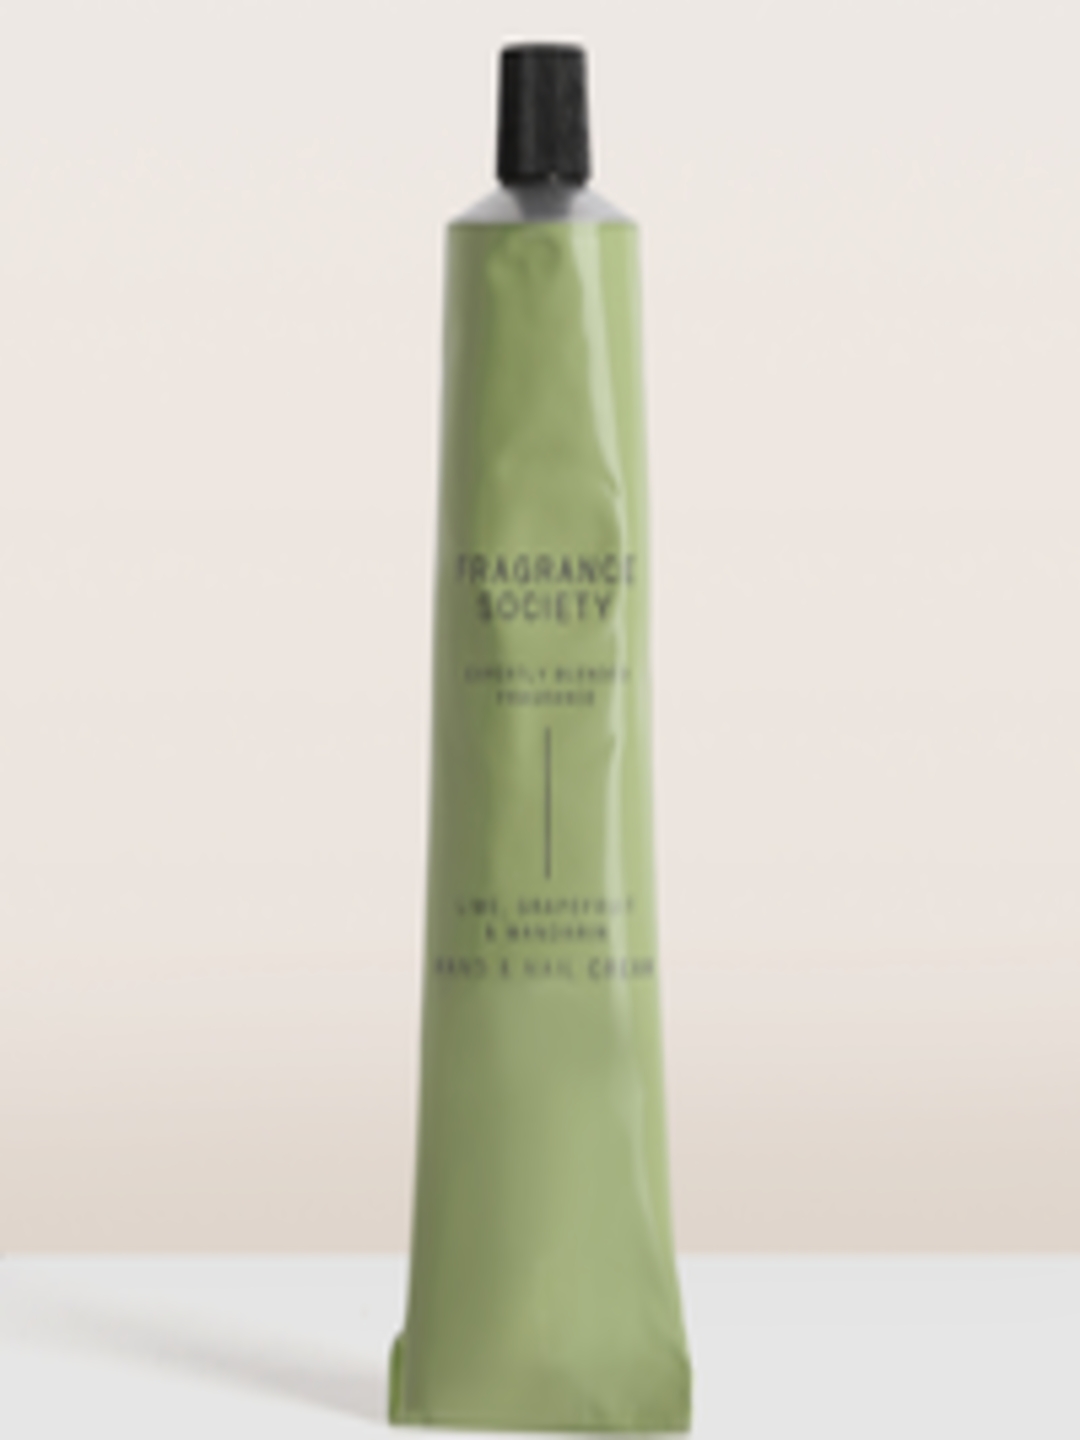 Buy Marks & Spencer Fragrance Society Hand & Nail Cream With Lime ...